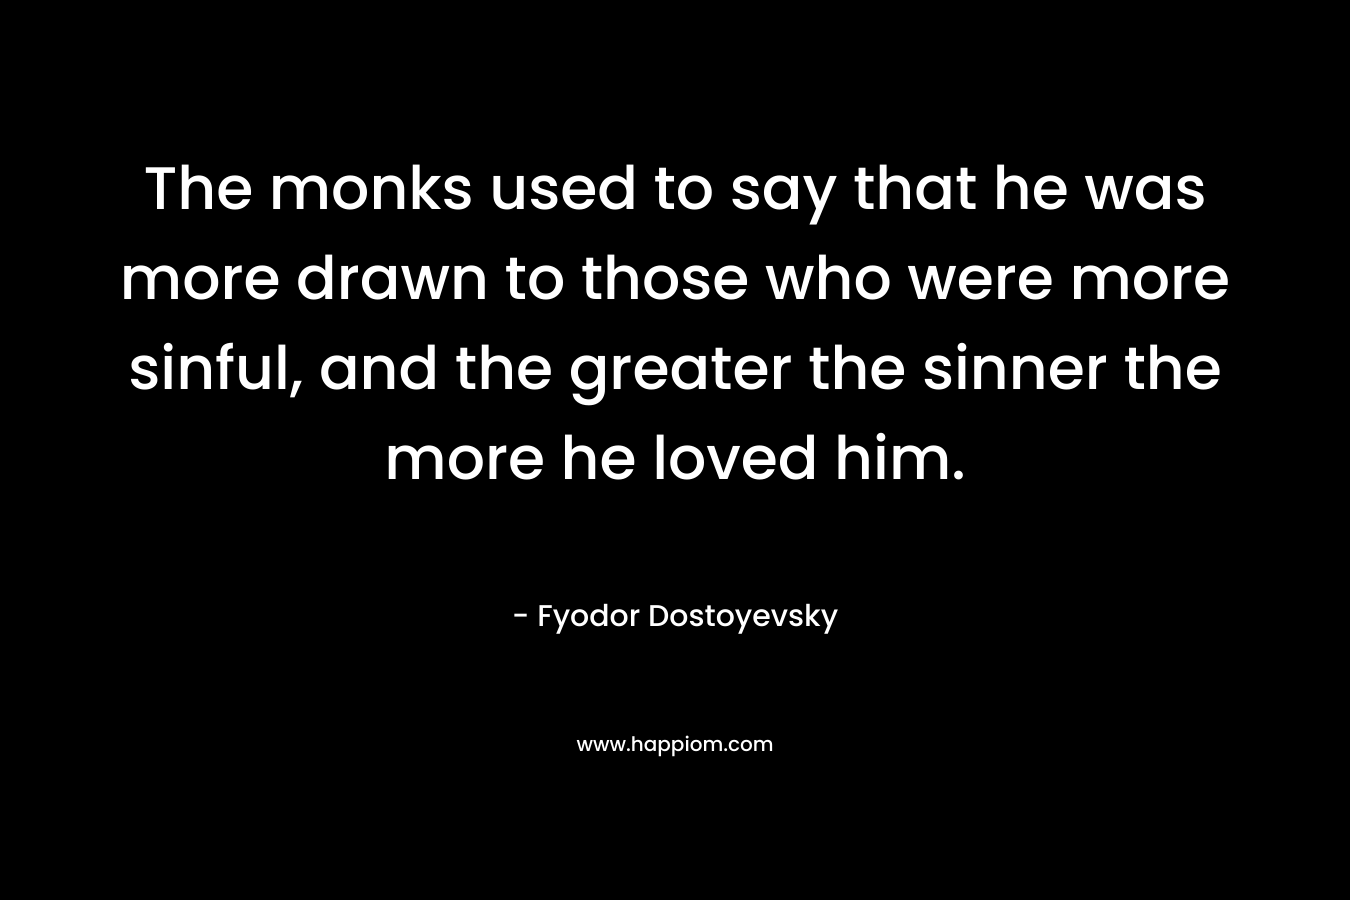 The monks used to say that he was more drawn to those who were more sinful, and the greater the sinner the more he loved him. – Fyodor Dostoyevsky